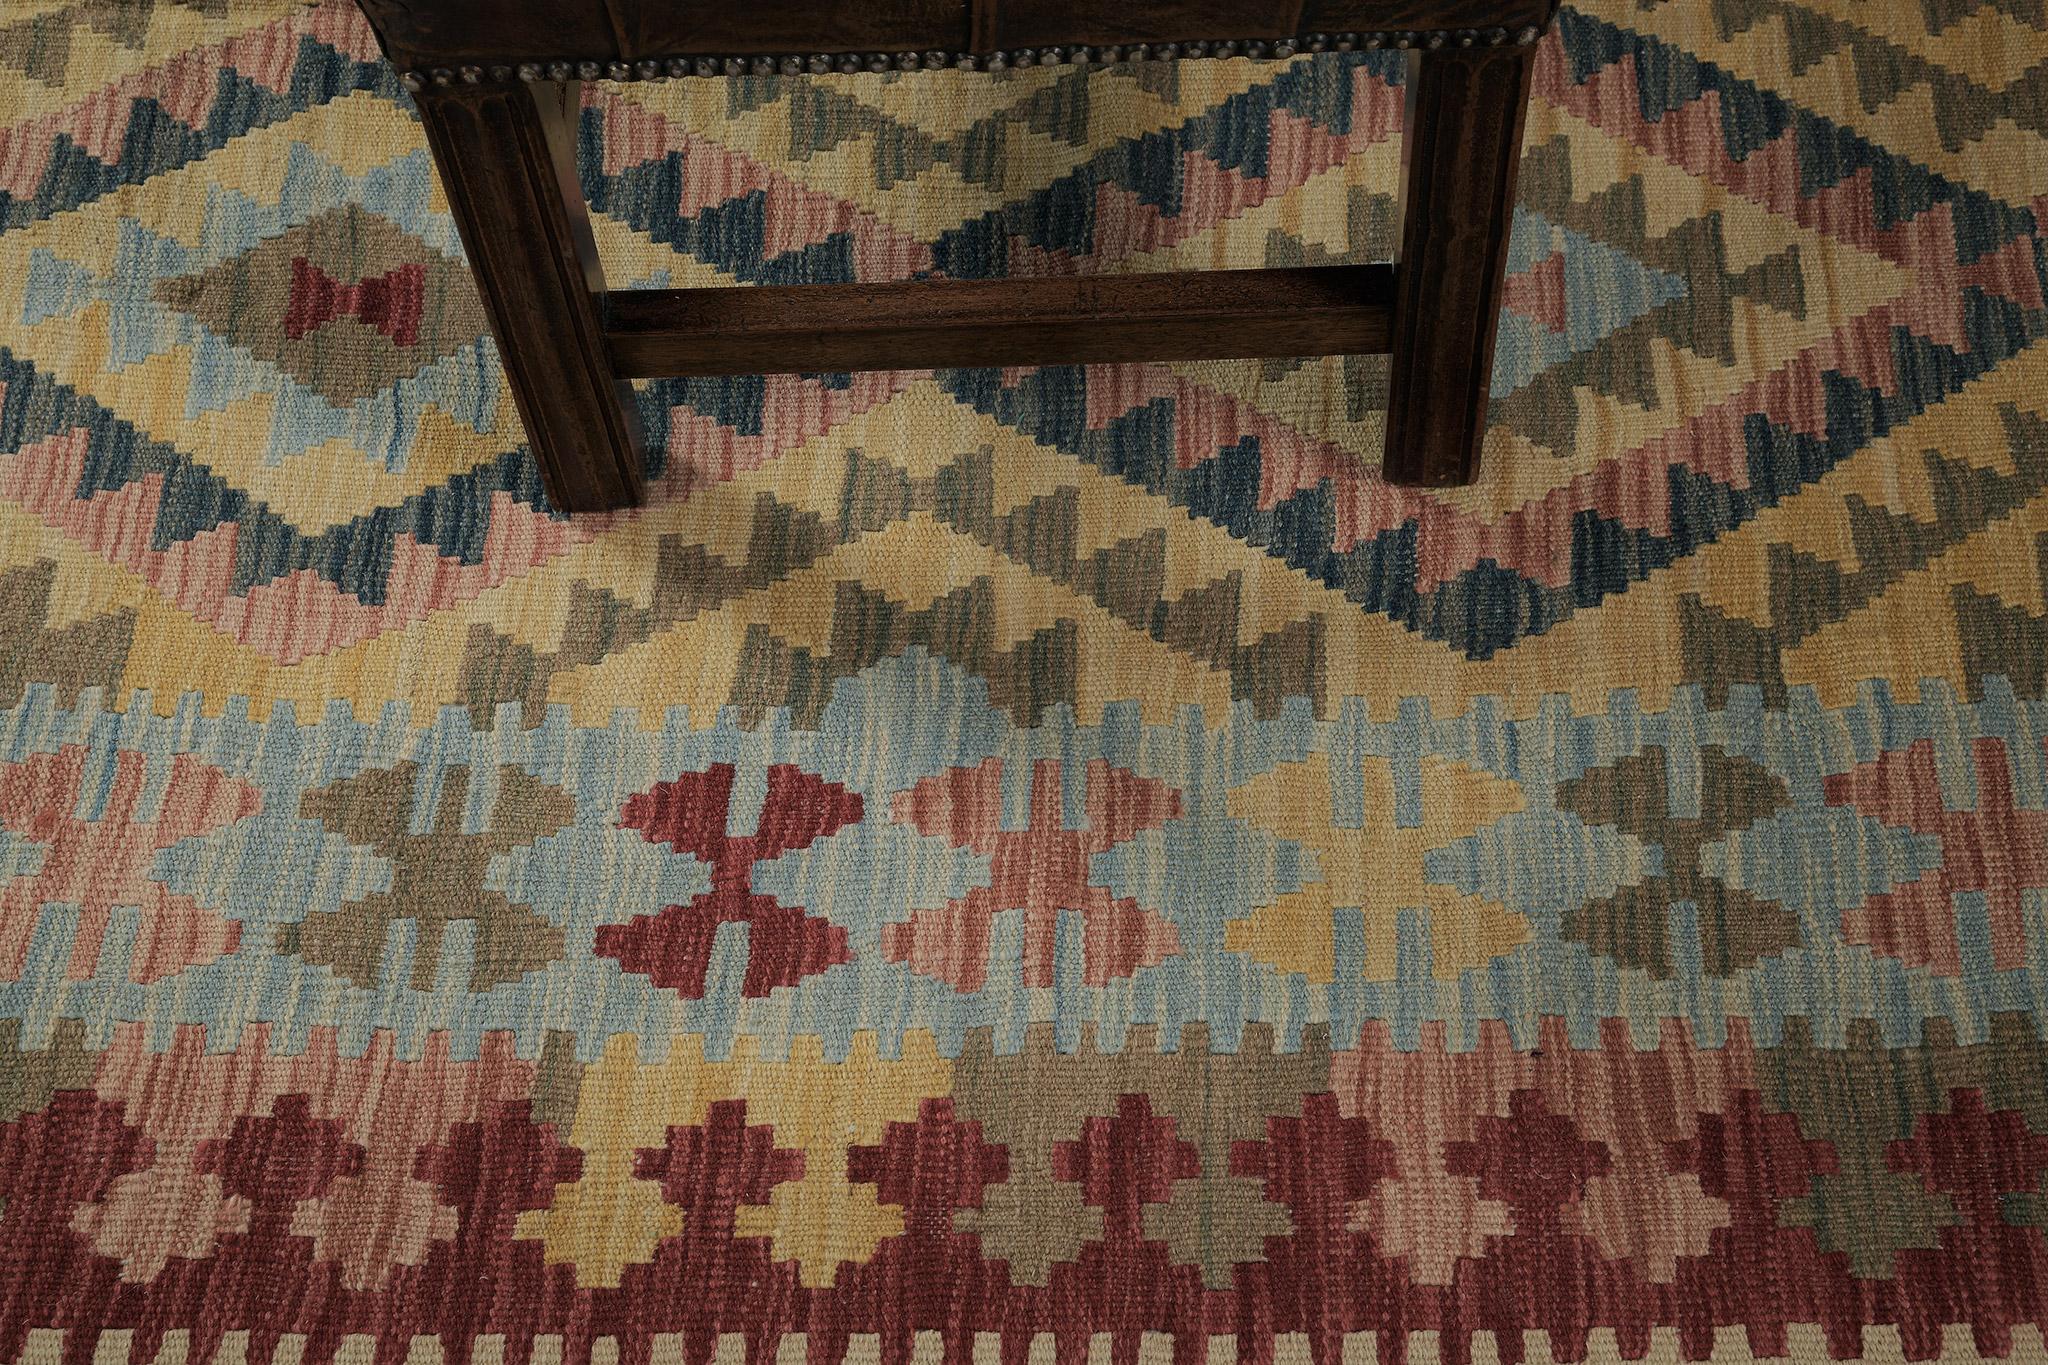 This multicolored flatweave kilim features an allover design of the diamond motif, triangles, and other tribal motifs. Having this kind of motif it makes more meaningful because of the beautiful details surrounding it. Traditional interiors are the